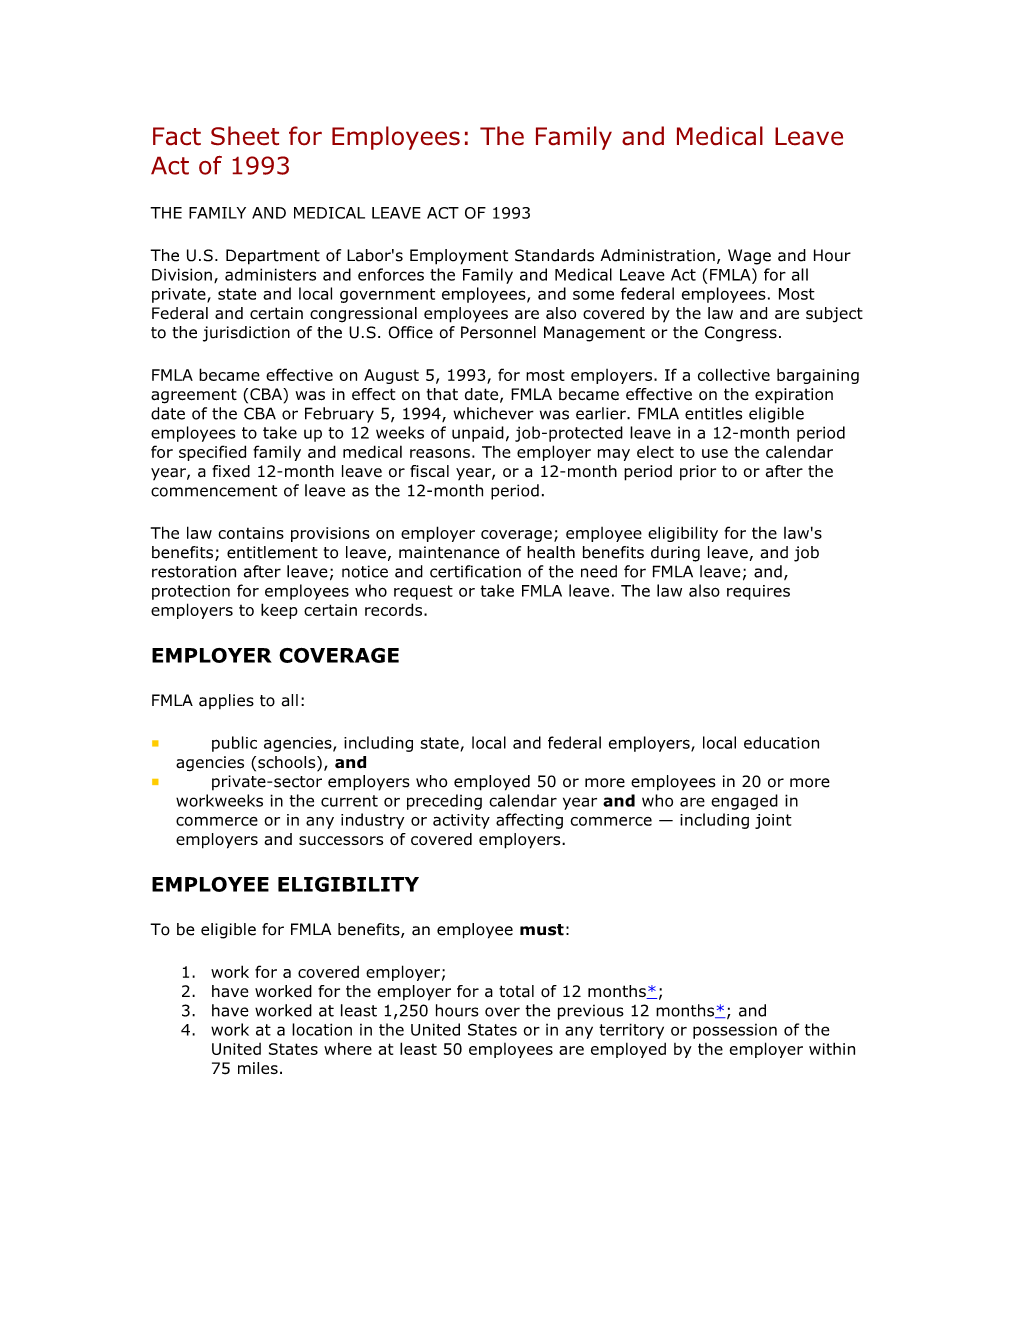 Fact Sheet for Employees: the Family and Medical Leave Act of 1993